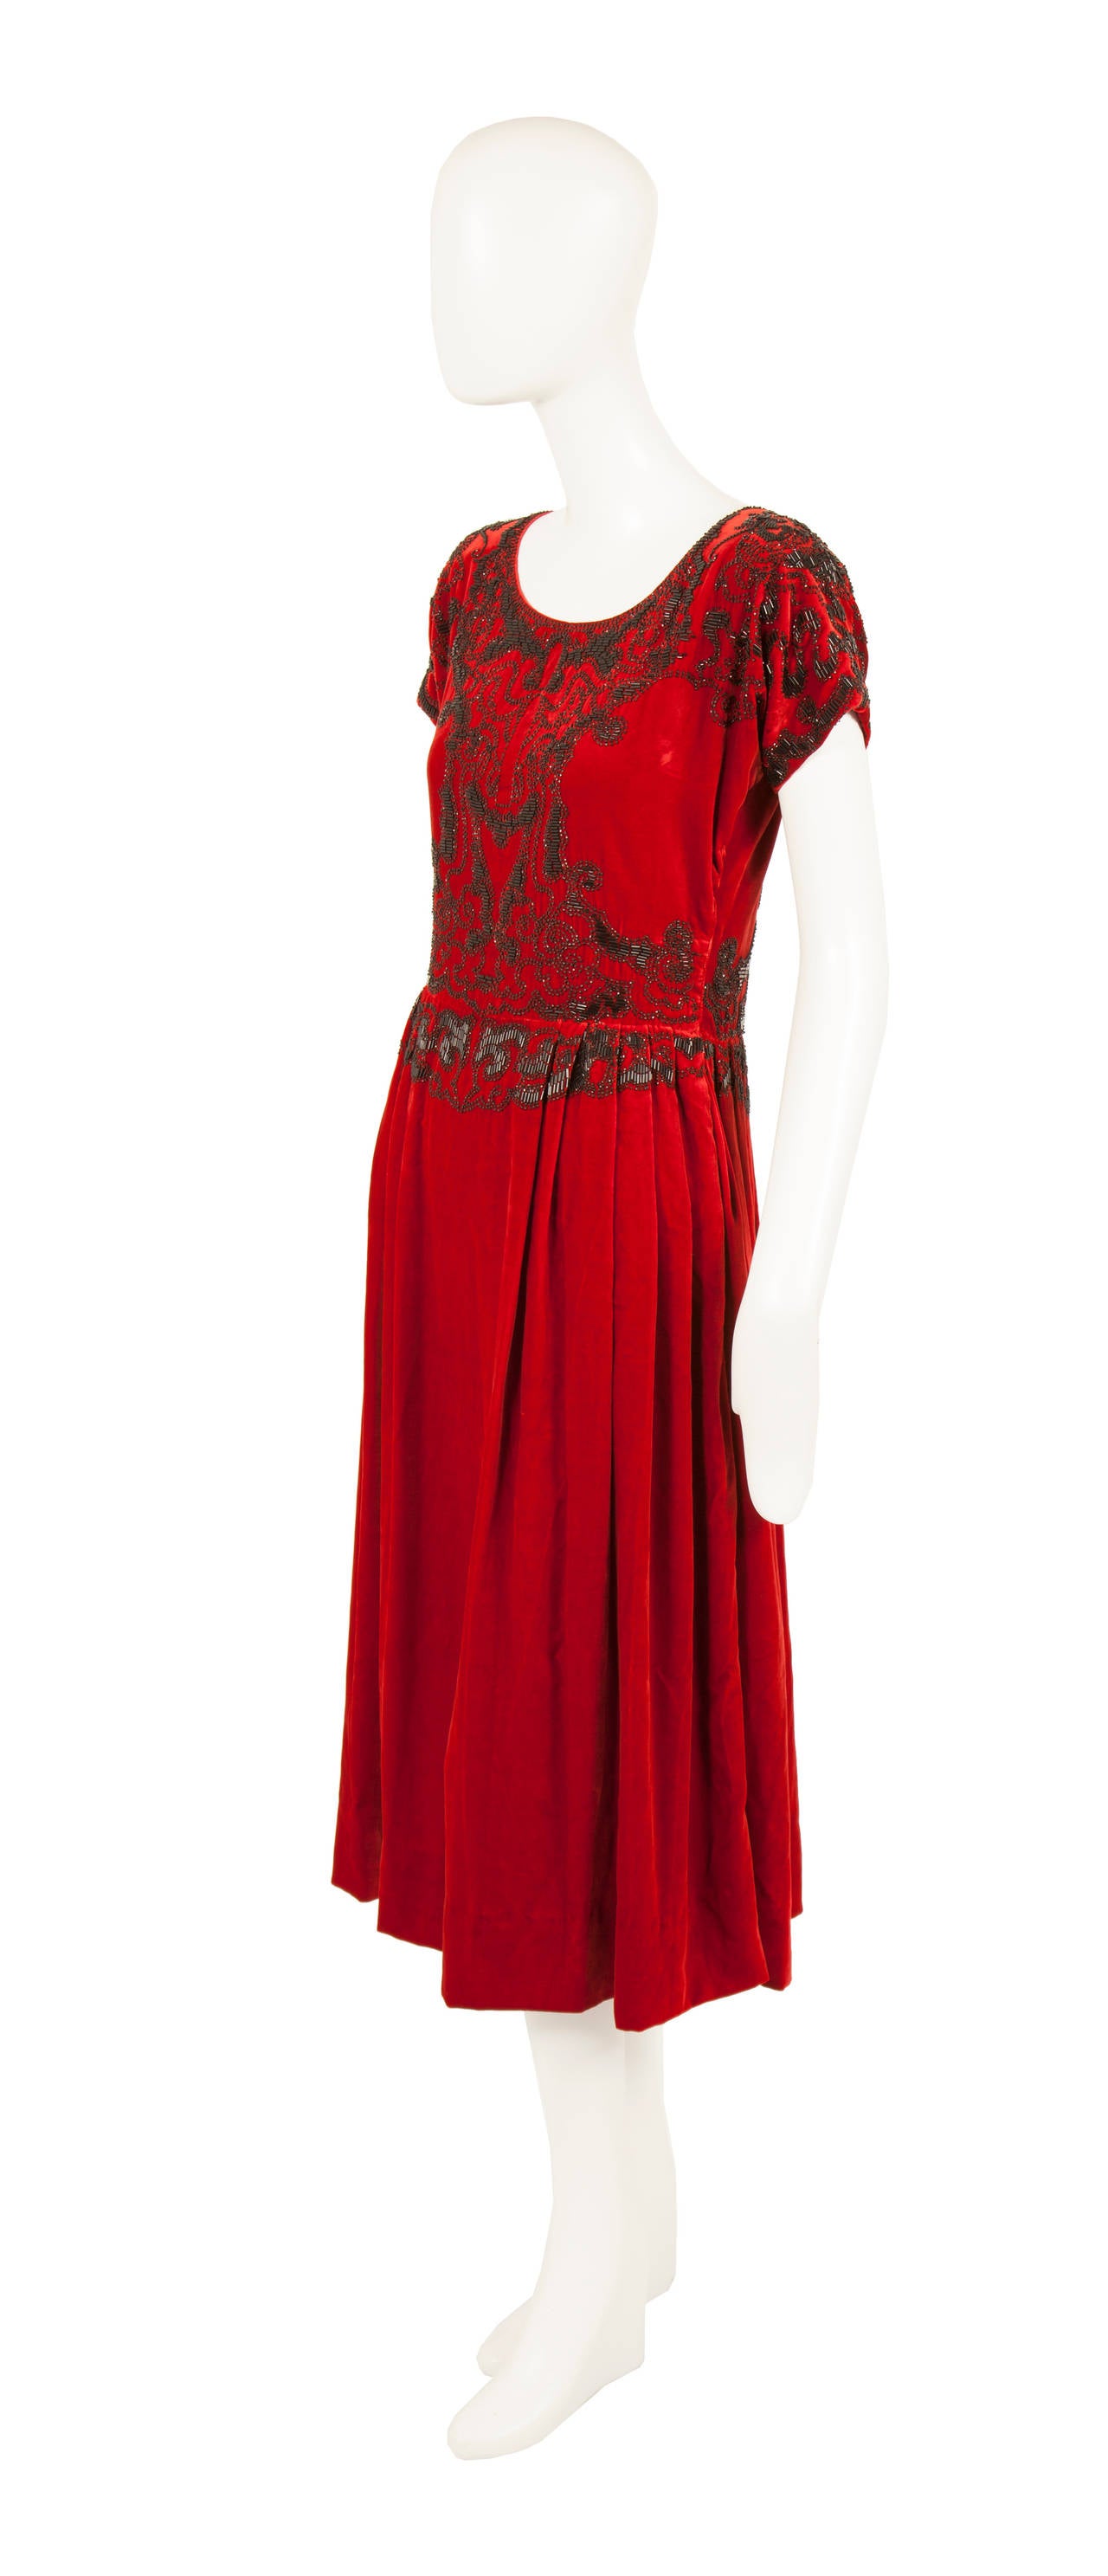 This rare Paul Poiret haute couture cocktail dress is an exceptional example of the designers work. Constructed of the finest ruby red silk velvet, the dress is intricately embroidered with black glass bugle beads on the body and capped sleeves,